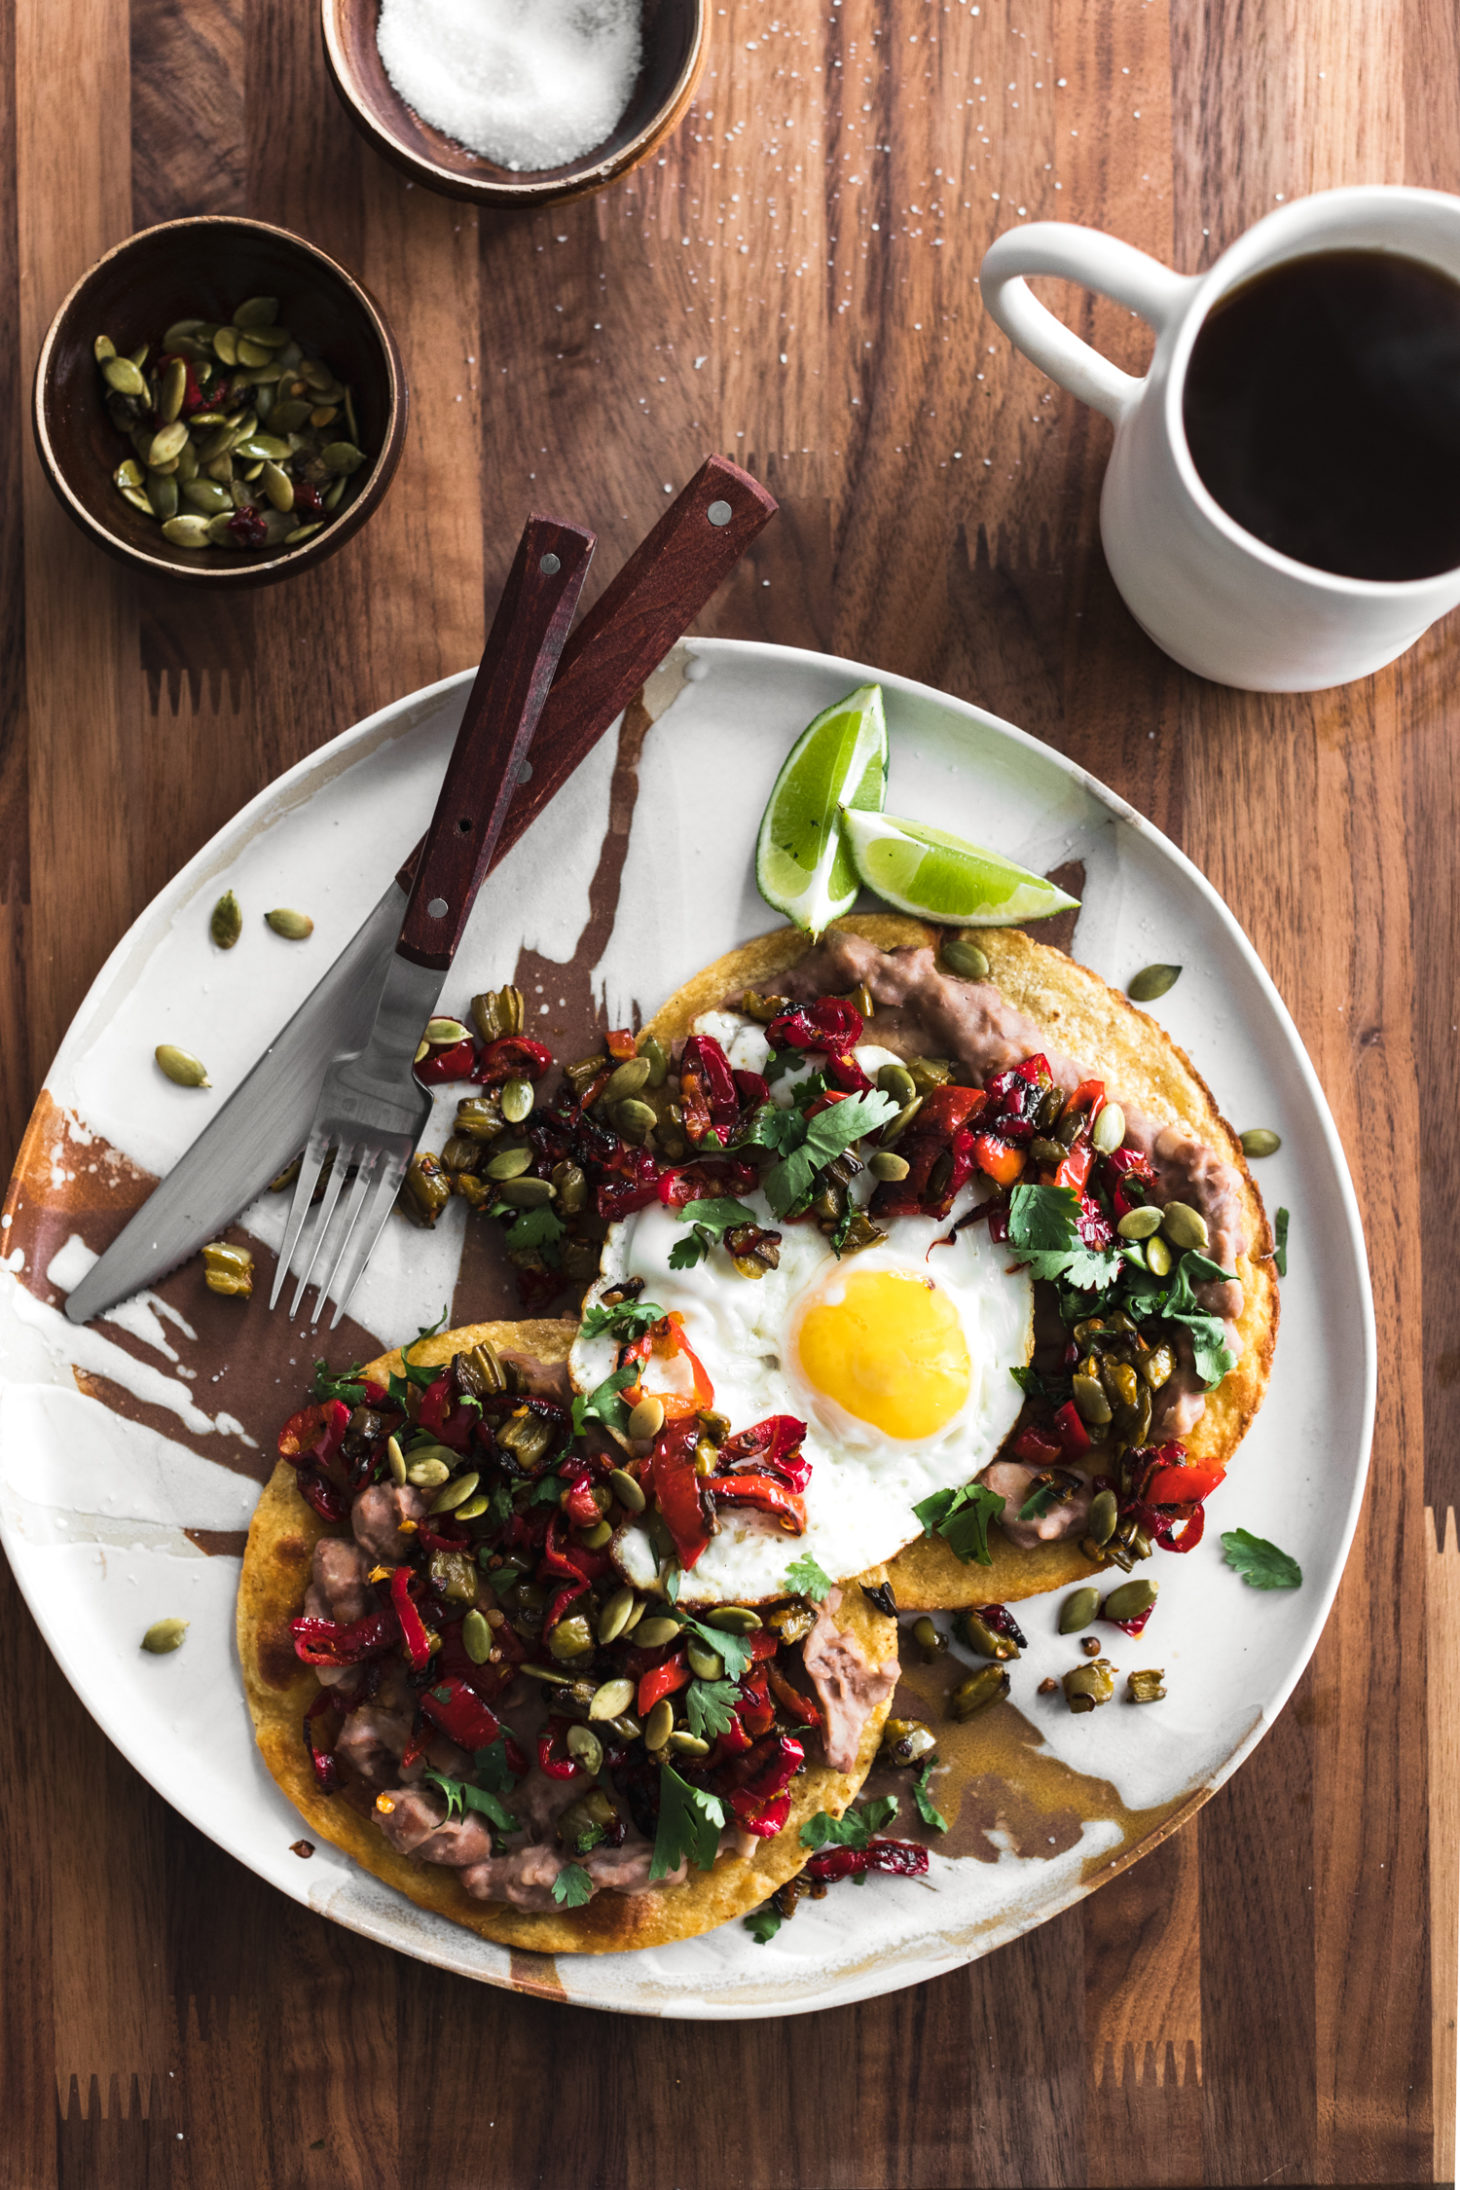 Breakafst Tostadas with Pinto Beans, Nopales, Peppers, and Eggs